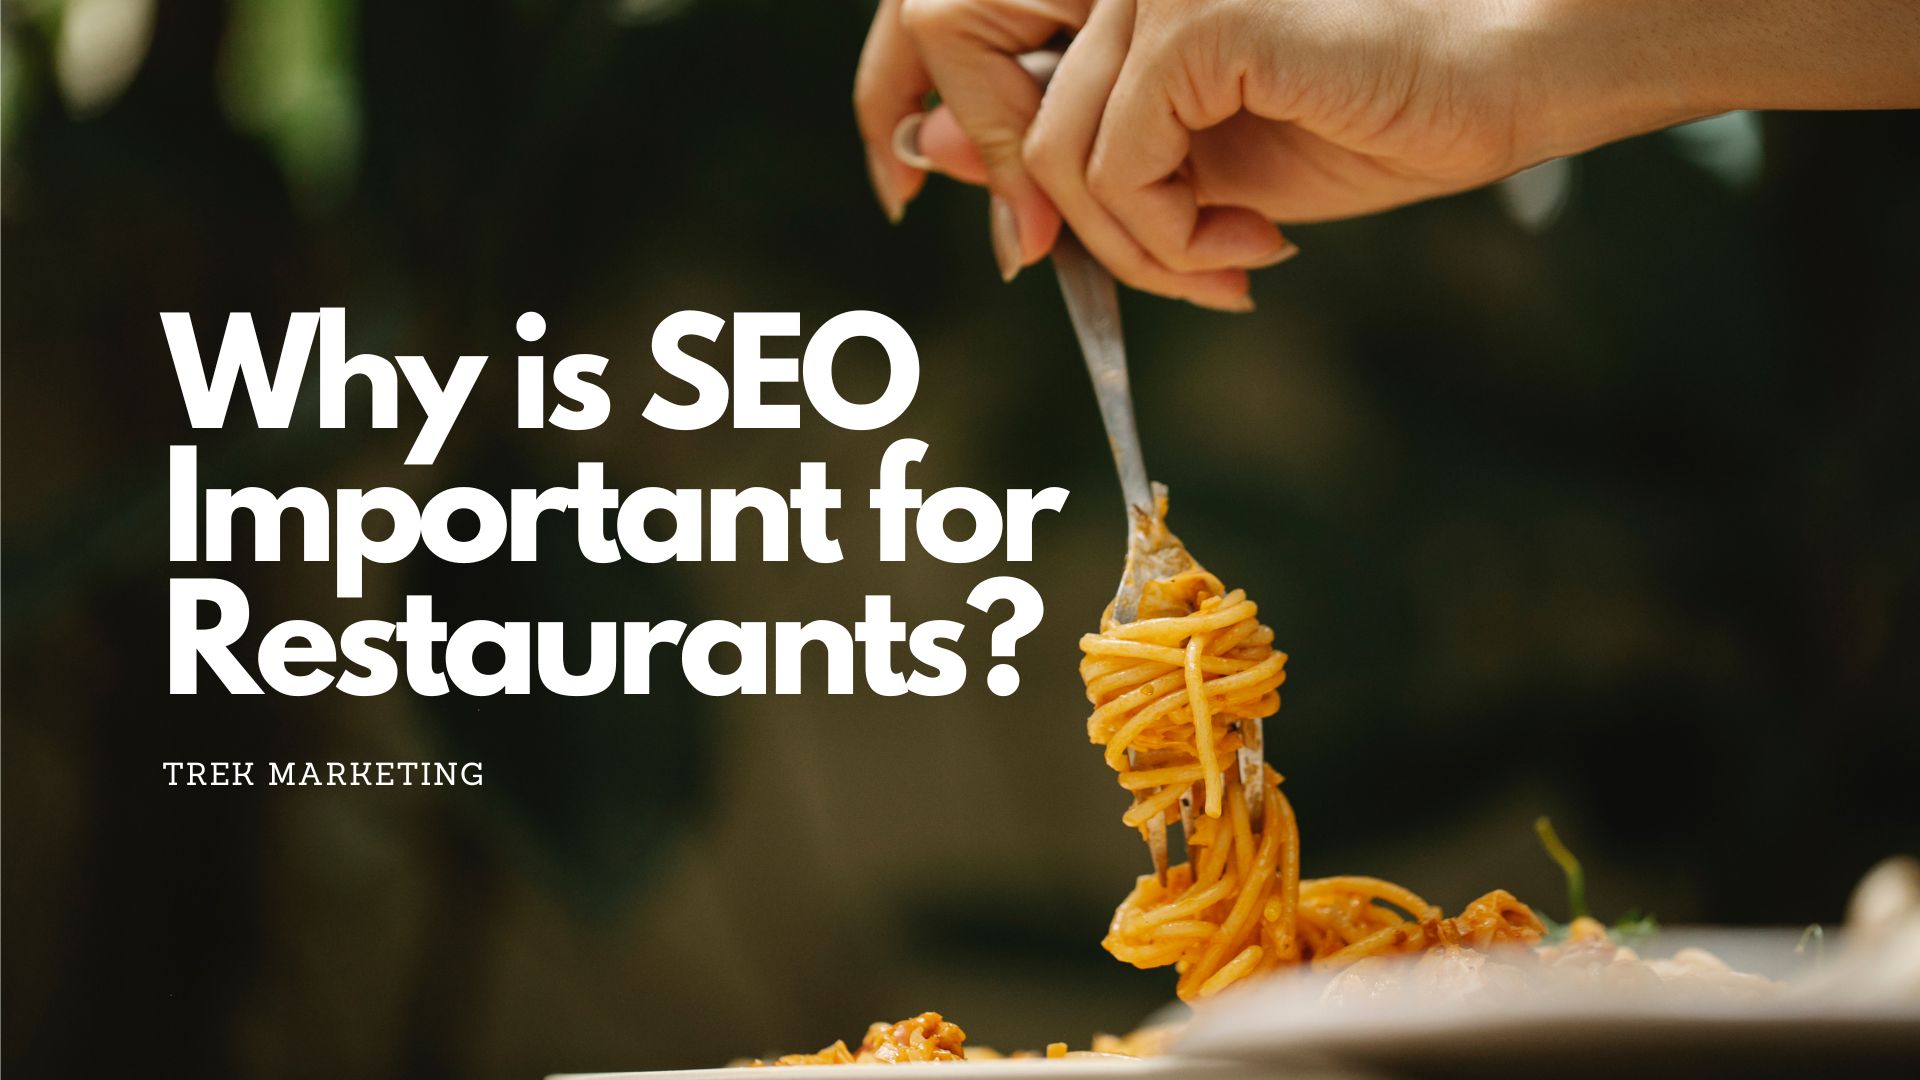 Why is SEO Important for Restaurants?